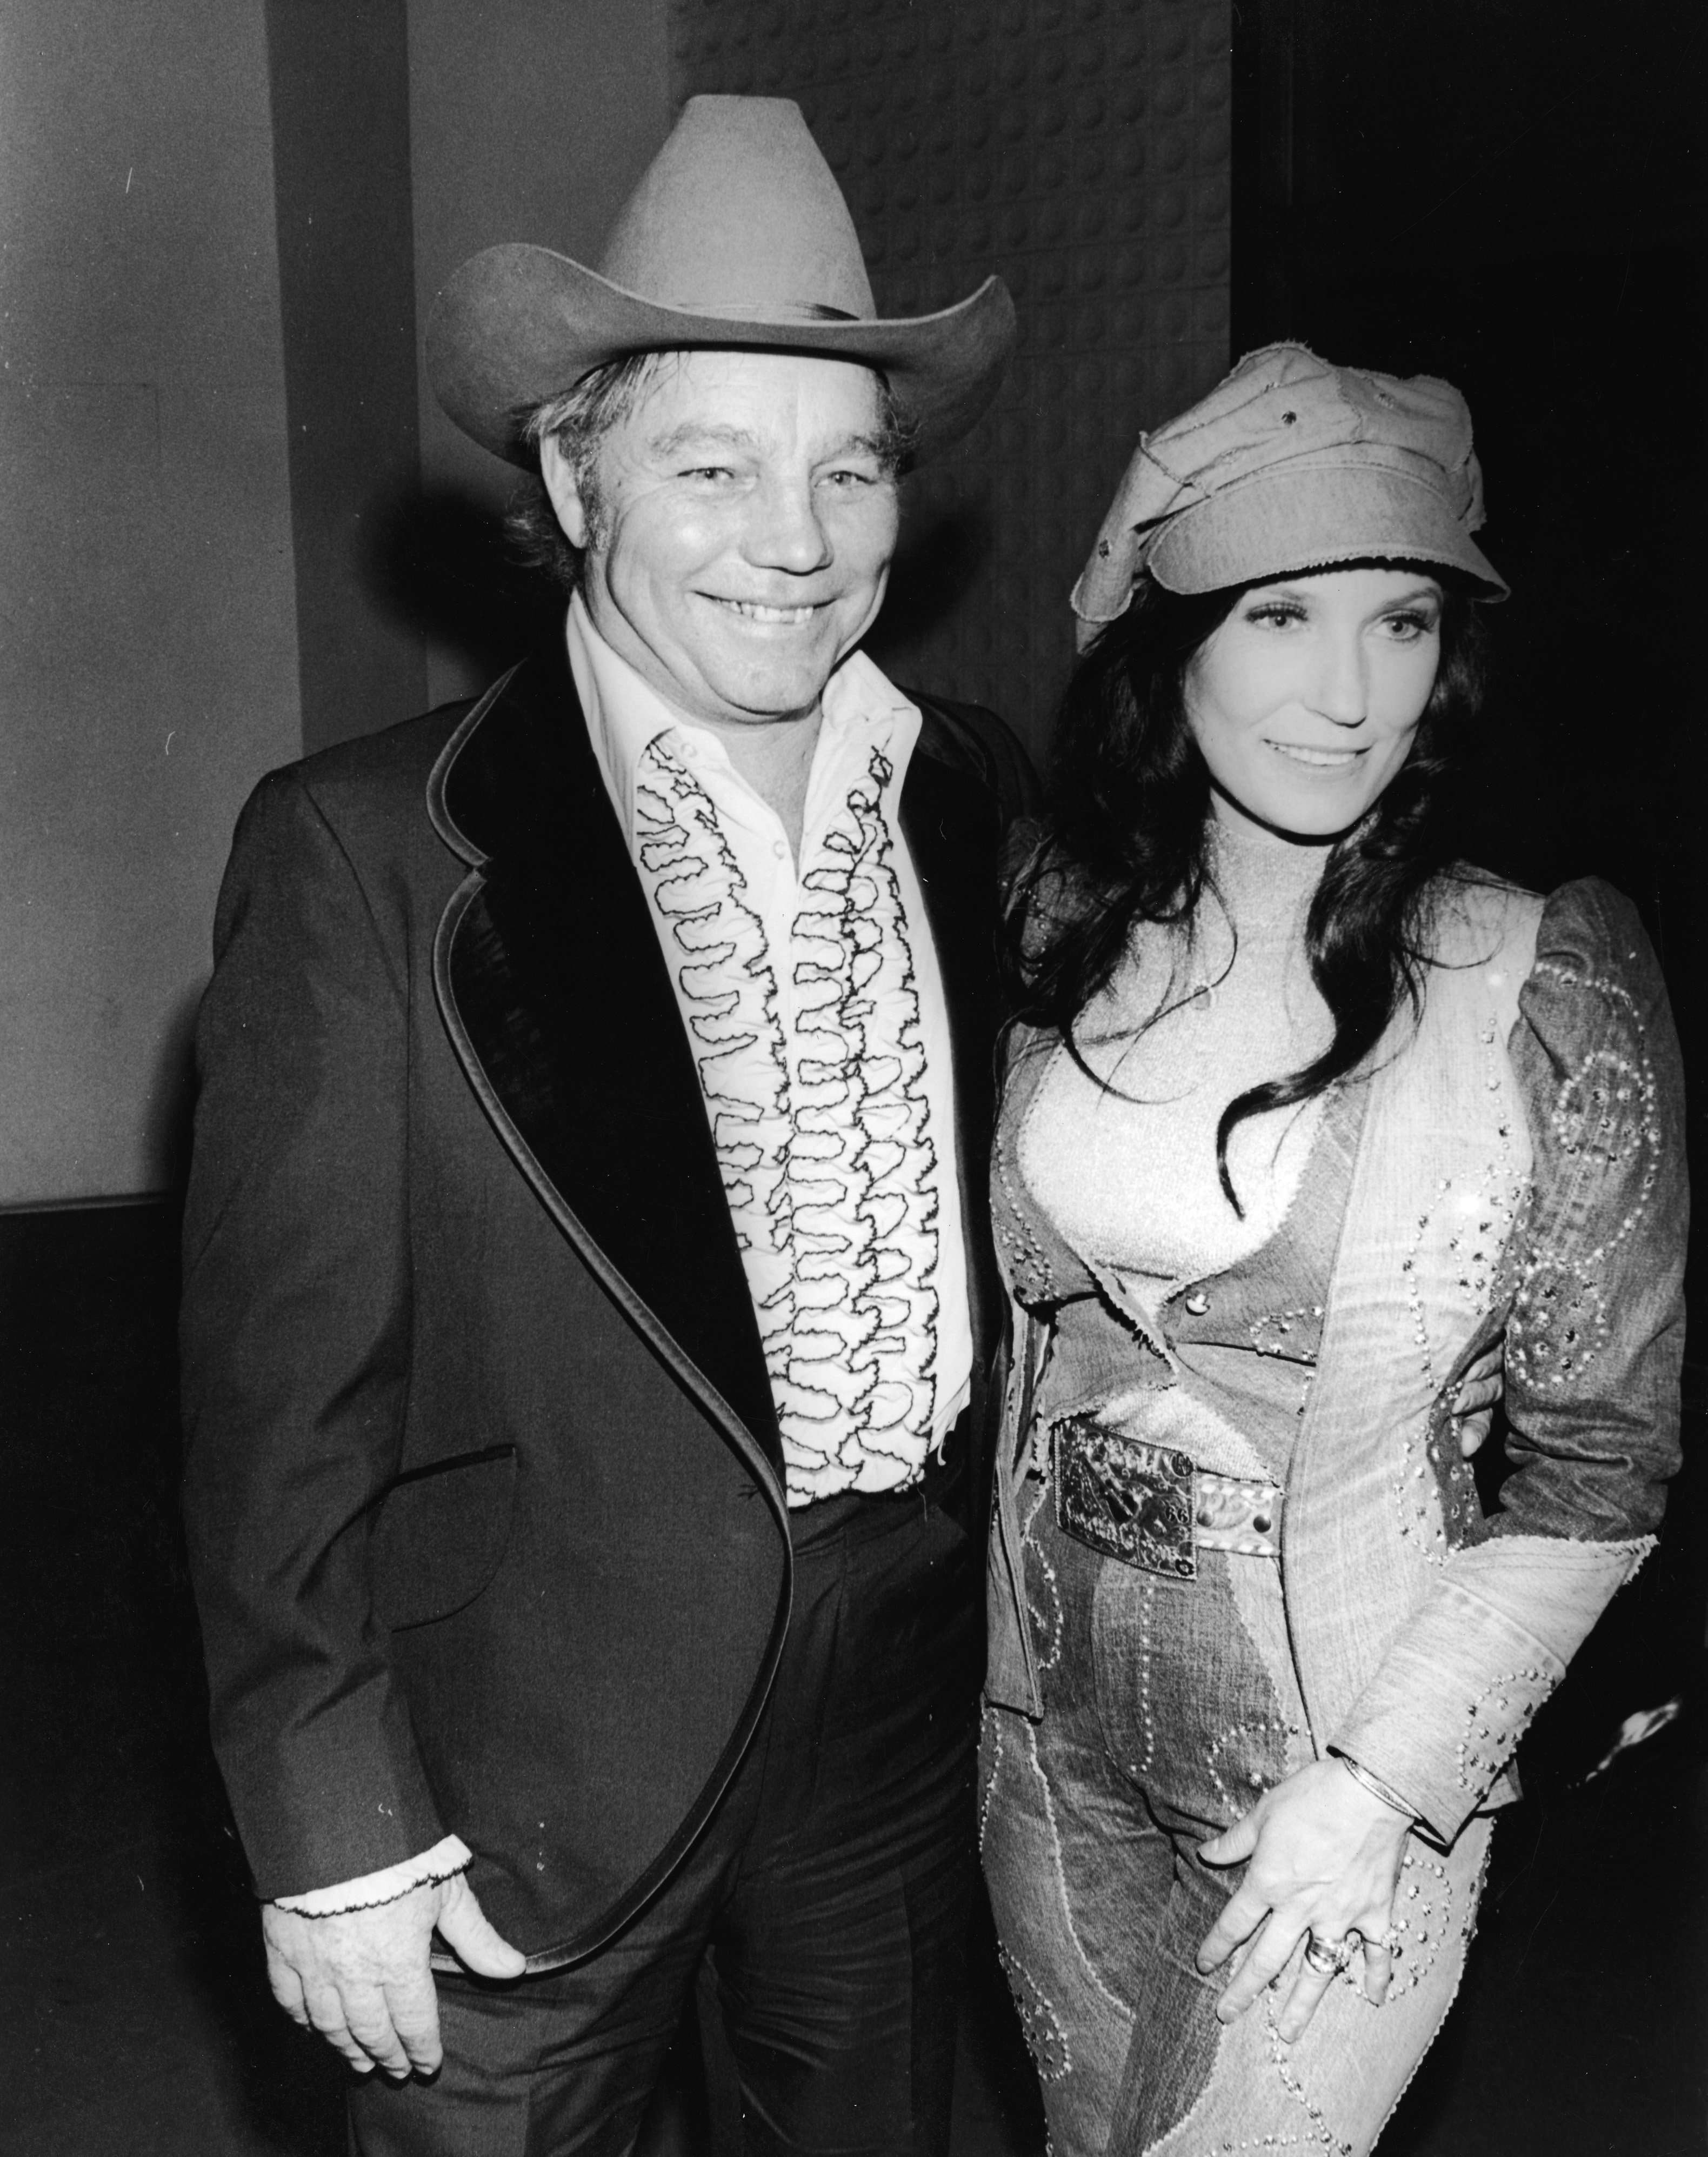 Loretta Lynn and her husband Oliver Lynn, Jr. (also known as Mooney) (1948 - 1996) at the Country & Western Music Awards, Hollywood, California | Source: Getty Images